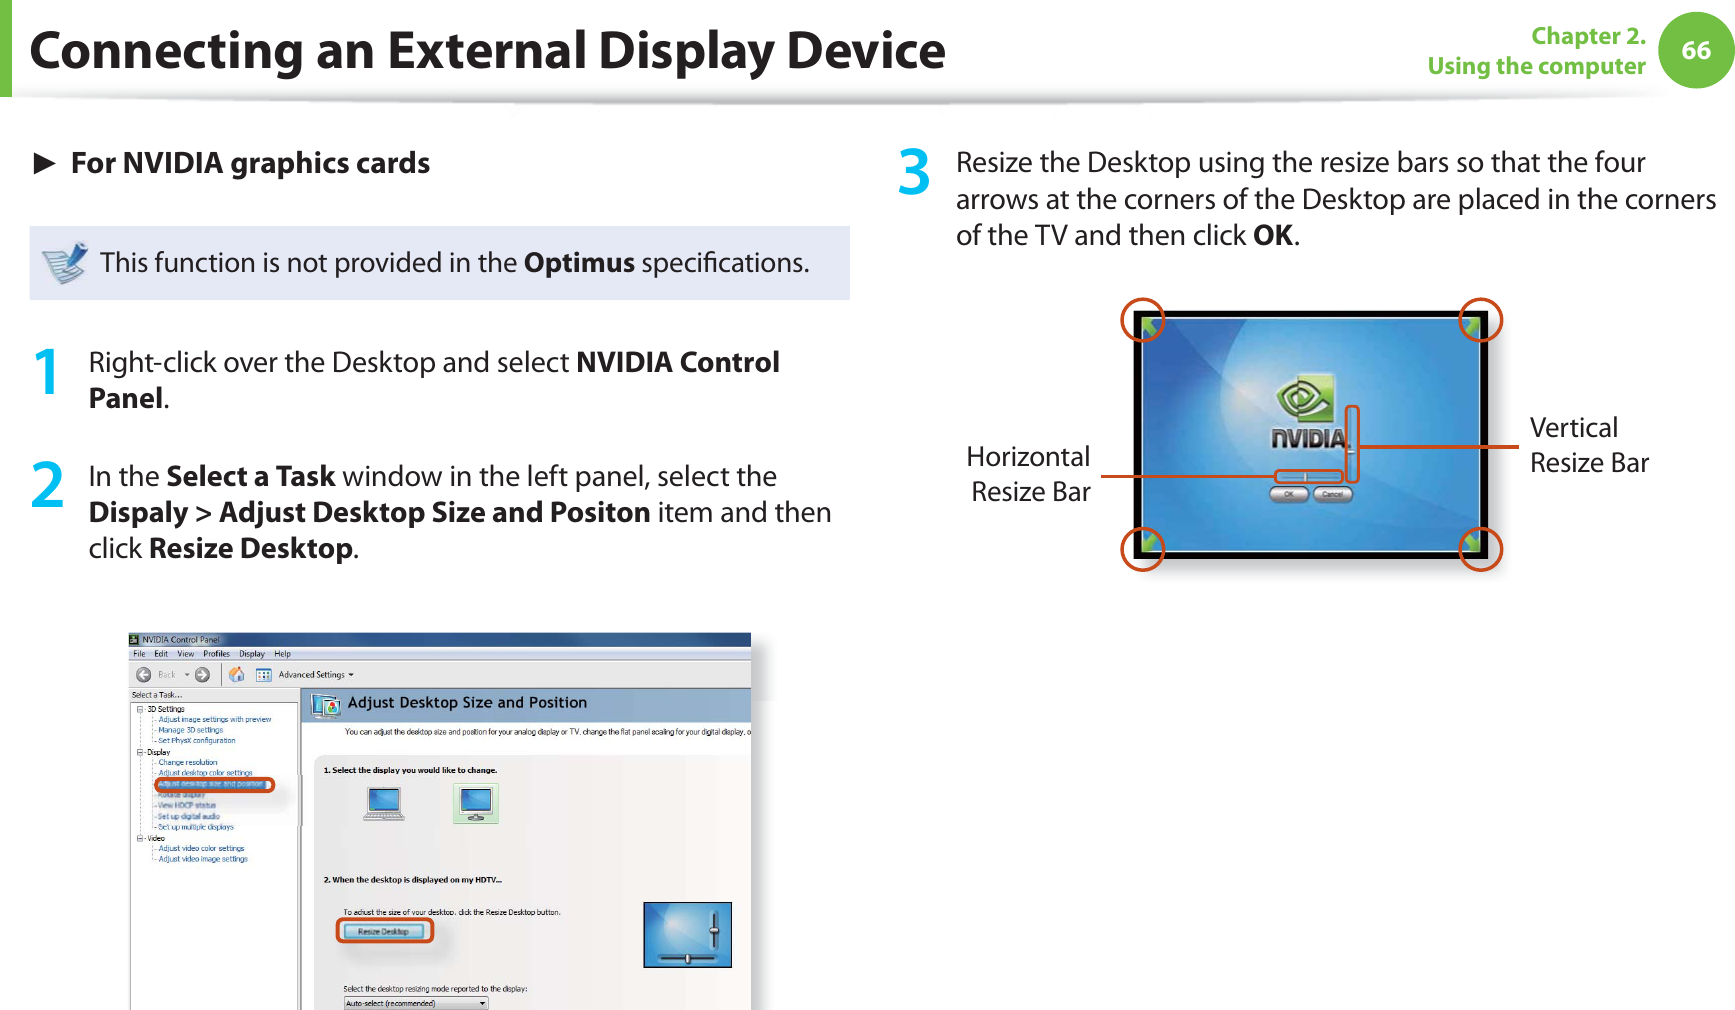 66Chapter 2. Using the computerConnecting an External Display Device► For NVIDIA graphics cardsThis function is not provided in the Optimus speciﬁ cations.1  Right-click over the Desktop and select NVIDIA Control Panel.2 In the Select a Task window in the left panel, select the Dispaly &gt; Adjust Desktop Size and Positon item and then click Resize Desktop.3  Resize the Desktop using the resize bars so that the four arrows at the corners of the Desktop are placed in the corners of the TV and then click OK.Horizontal Resize BarVertical Resize Bar